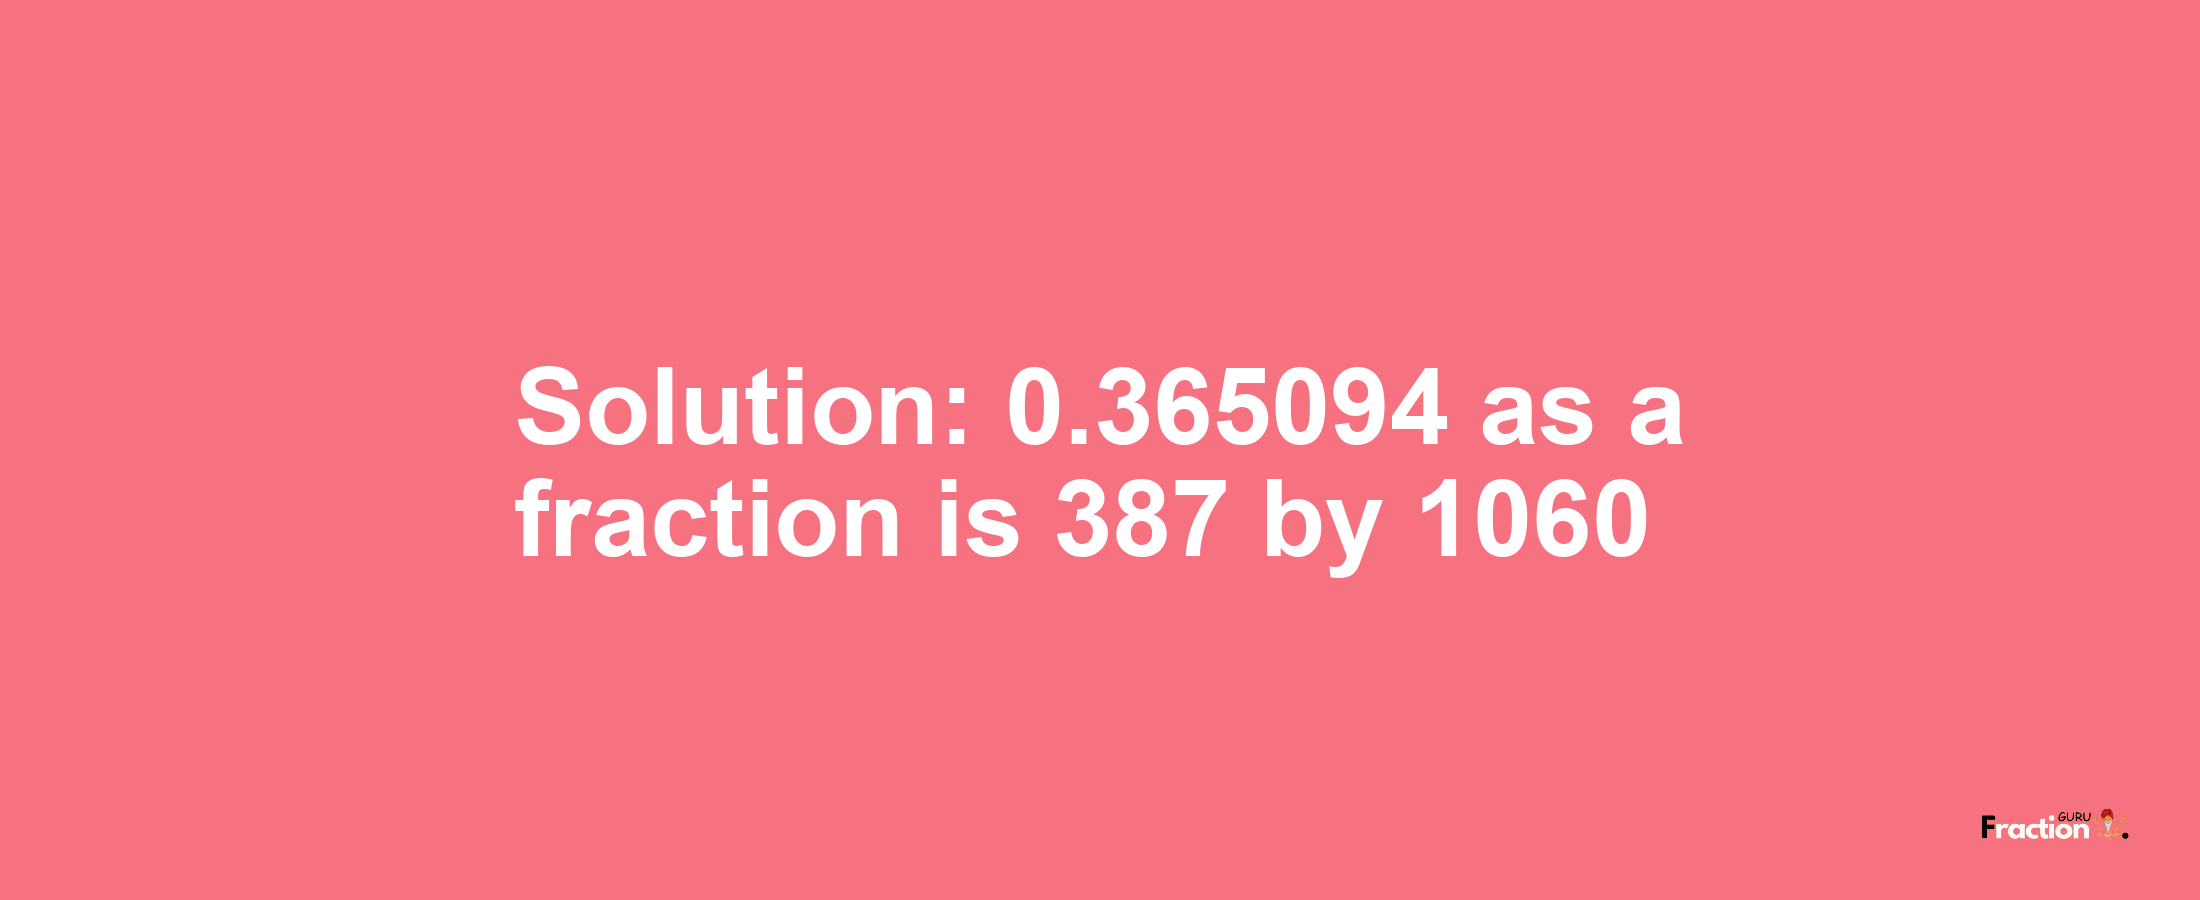 Solution:0.365094 as a fraction is 387/1060